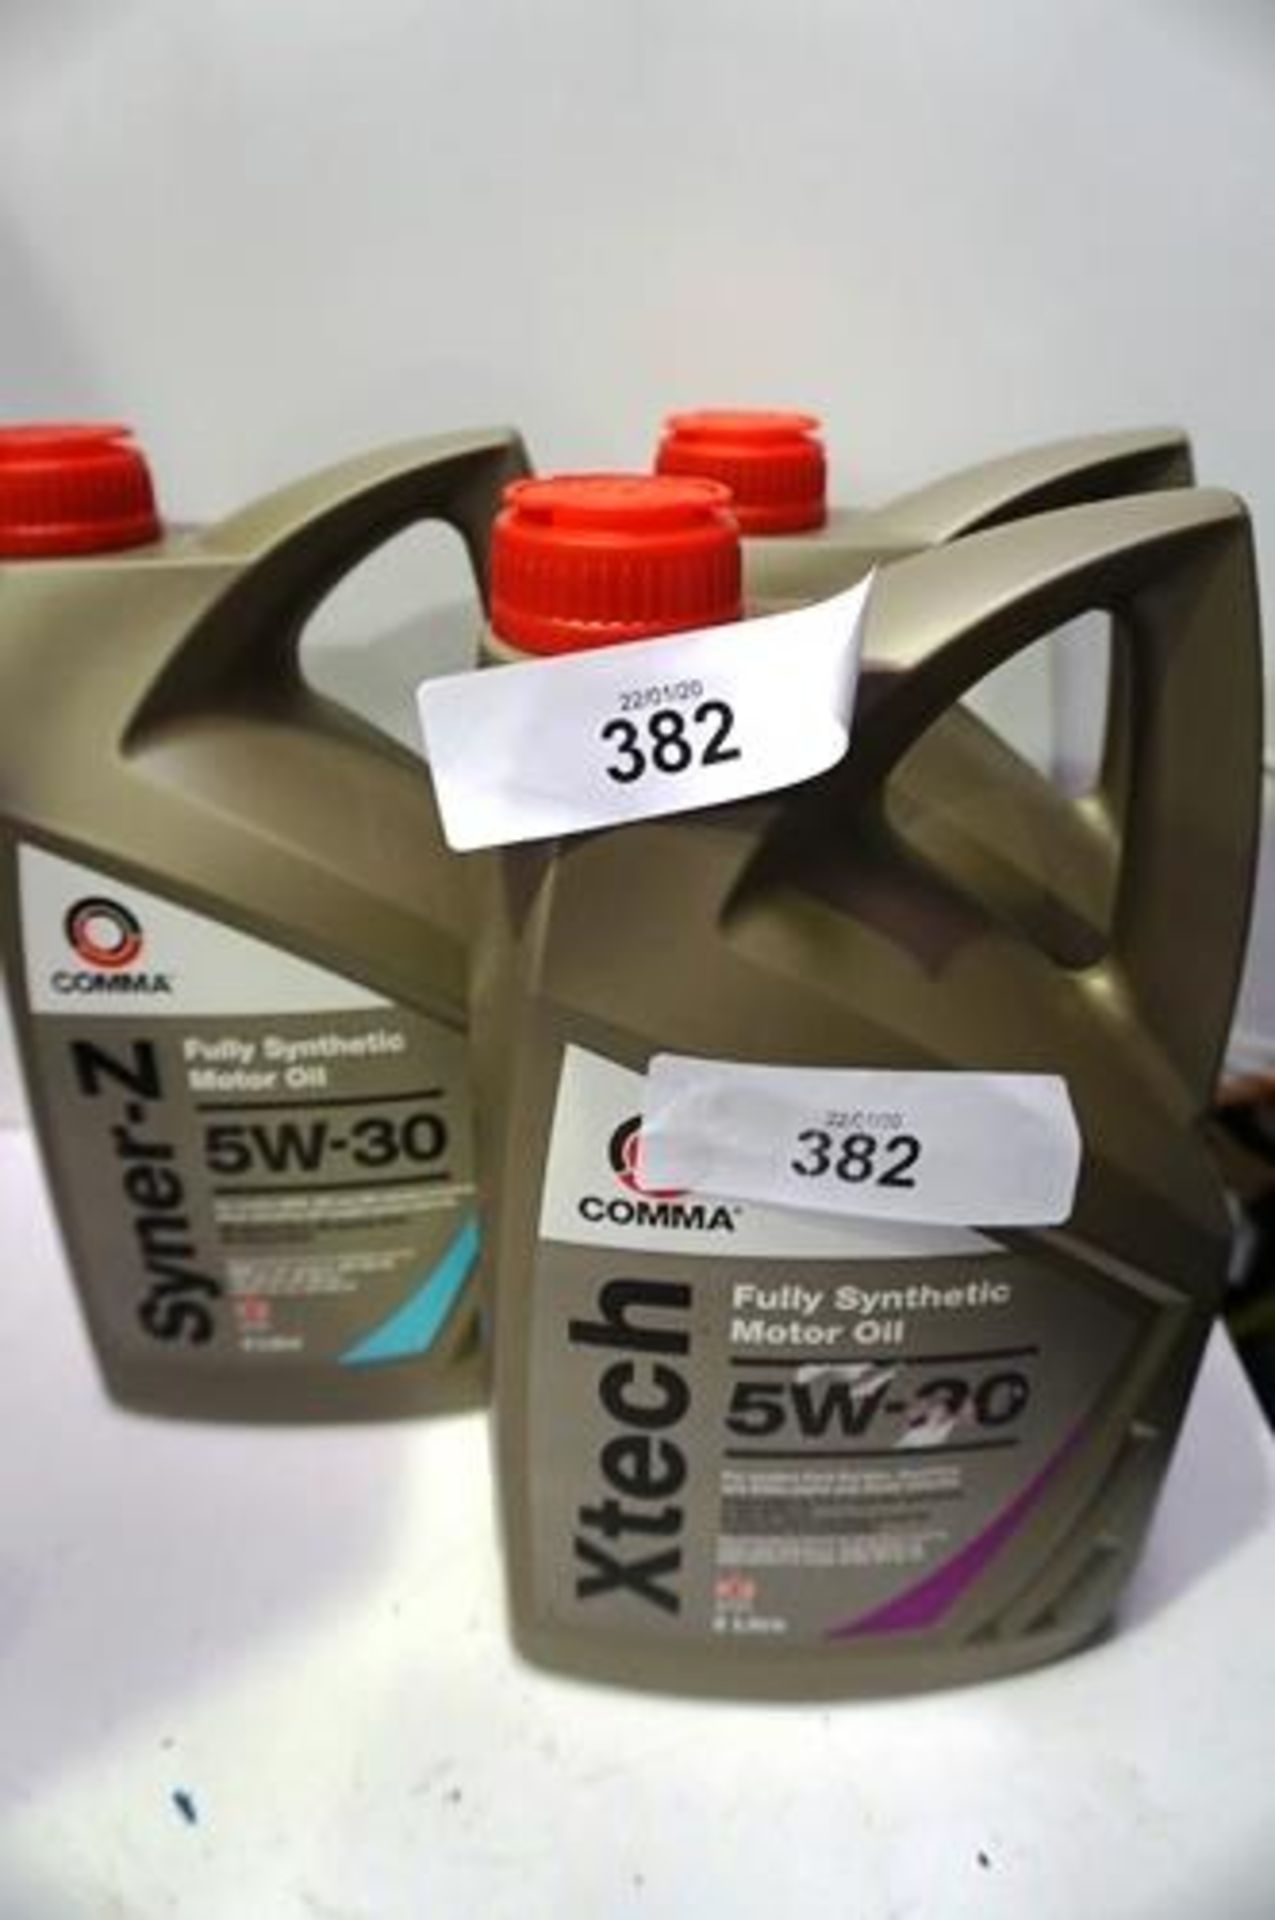 3 x 5ltr bottles of Comma fully synthetic motor oil, 5/W30 - Sealed new (GS11)